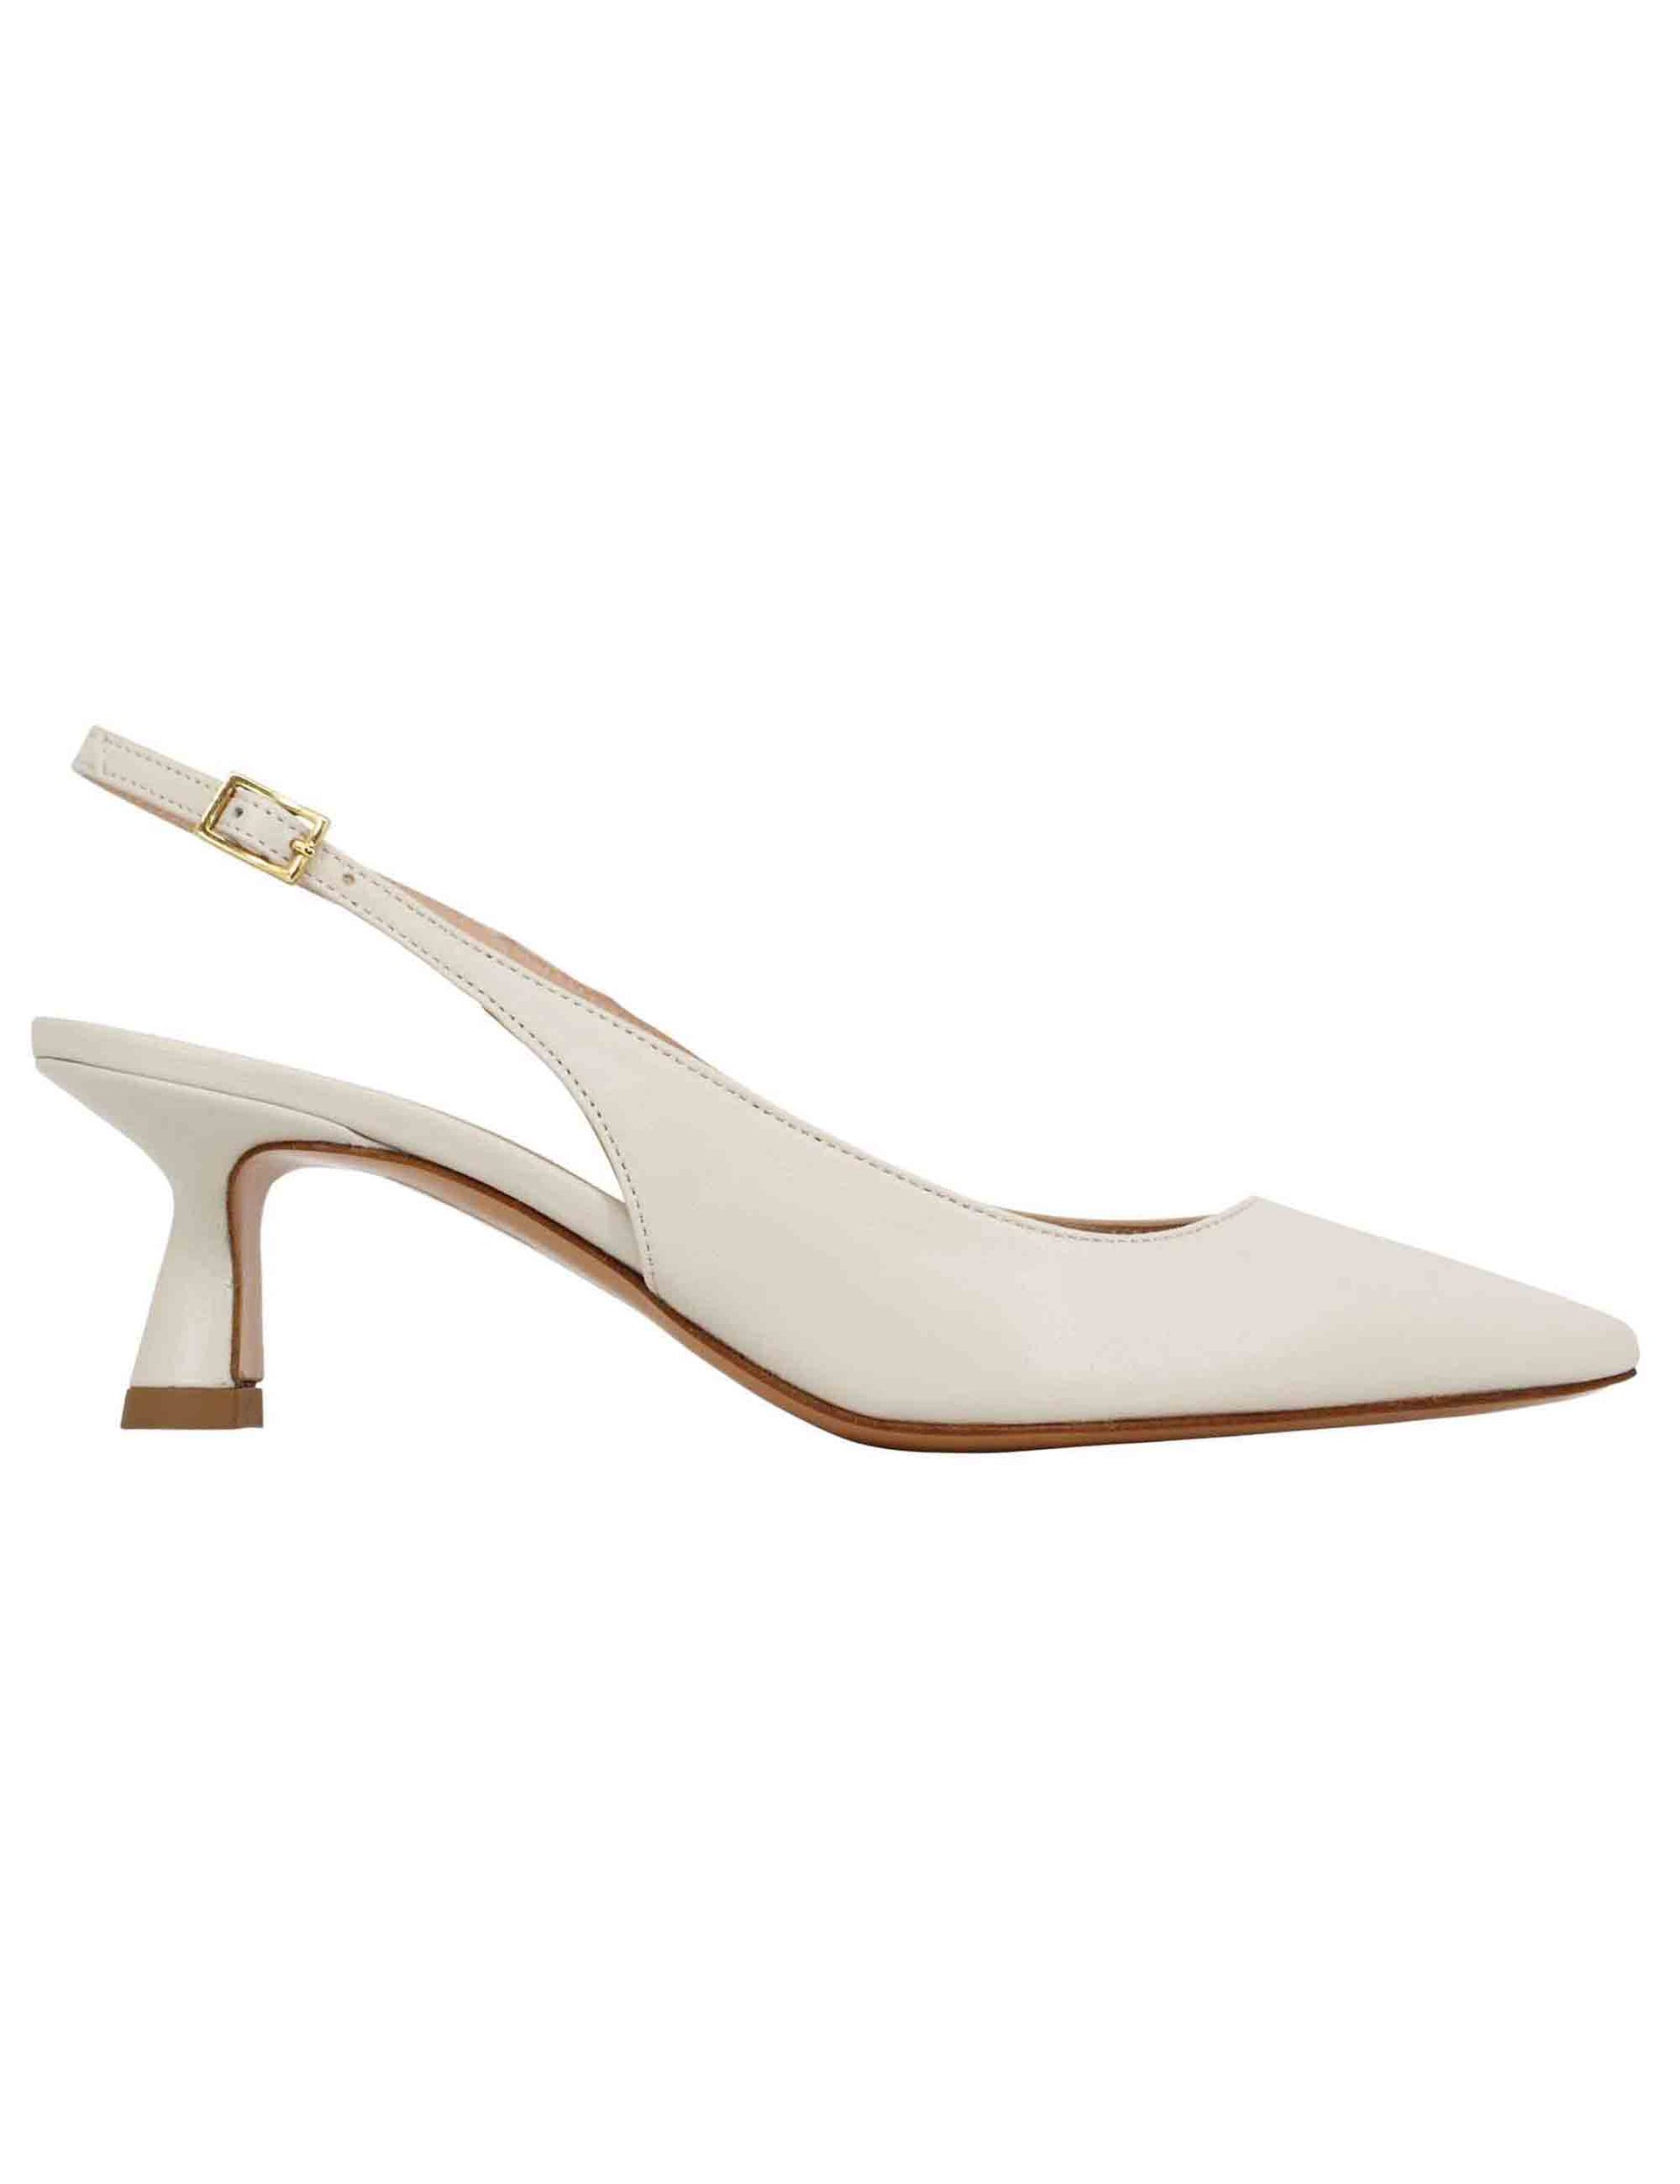 Women's slingback decollete in off white leather with low heel